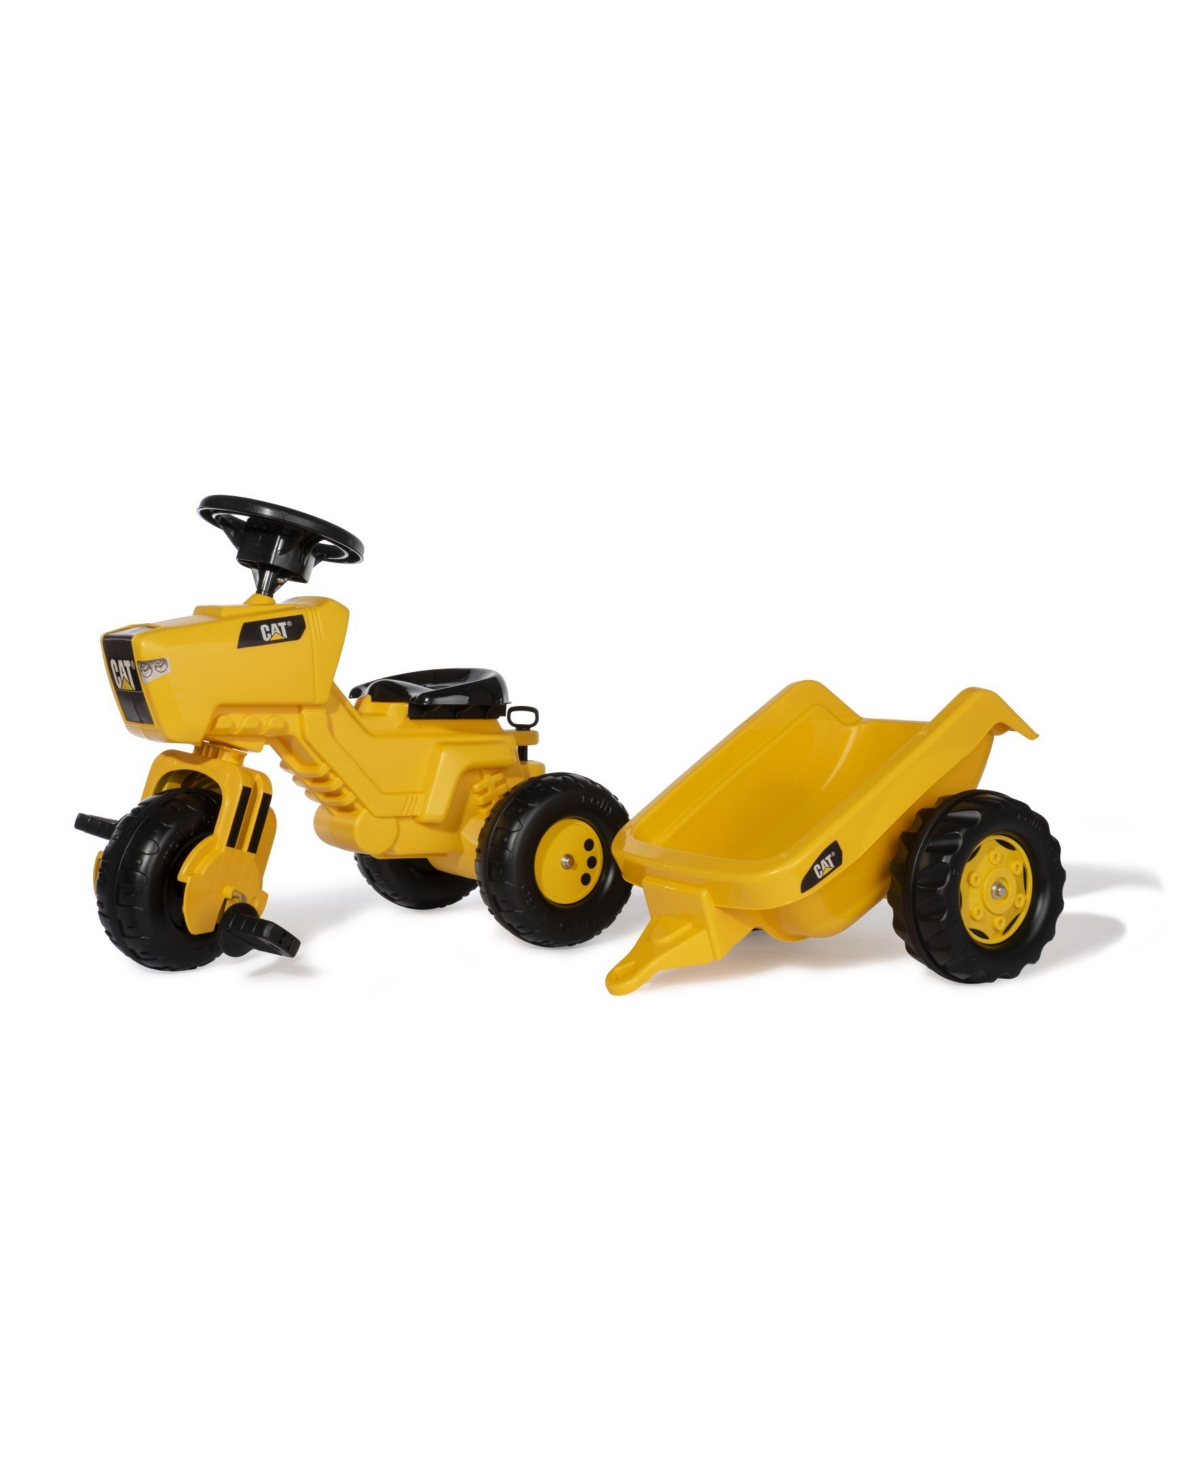 Shop Rolly Toys Cat 3 Wheel Trike Pedal Tractor With Removable Hauling Trailer In Yellow